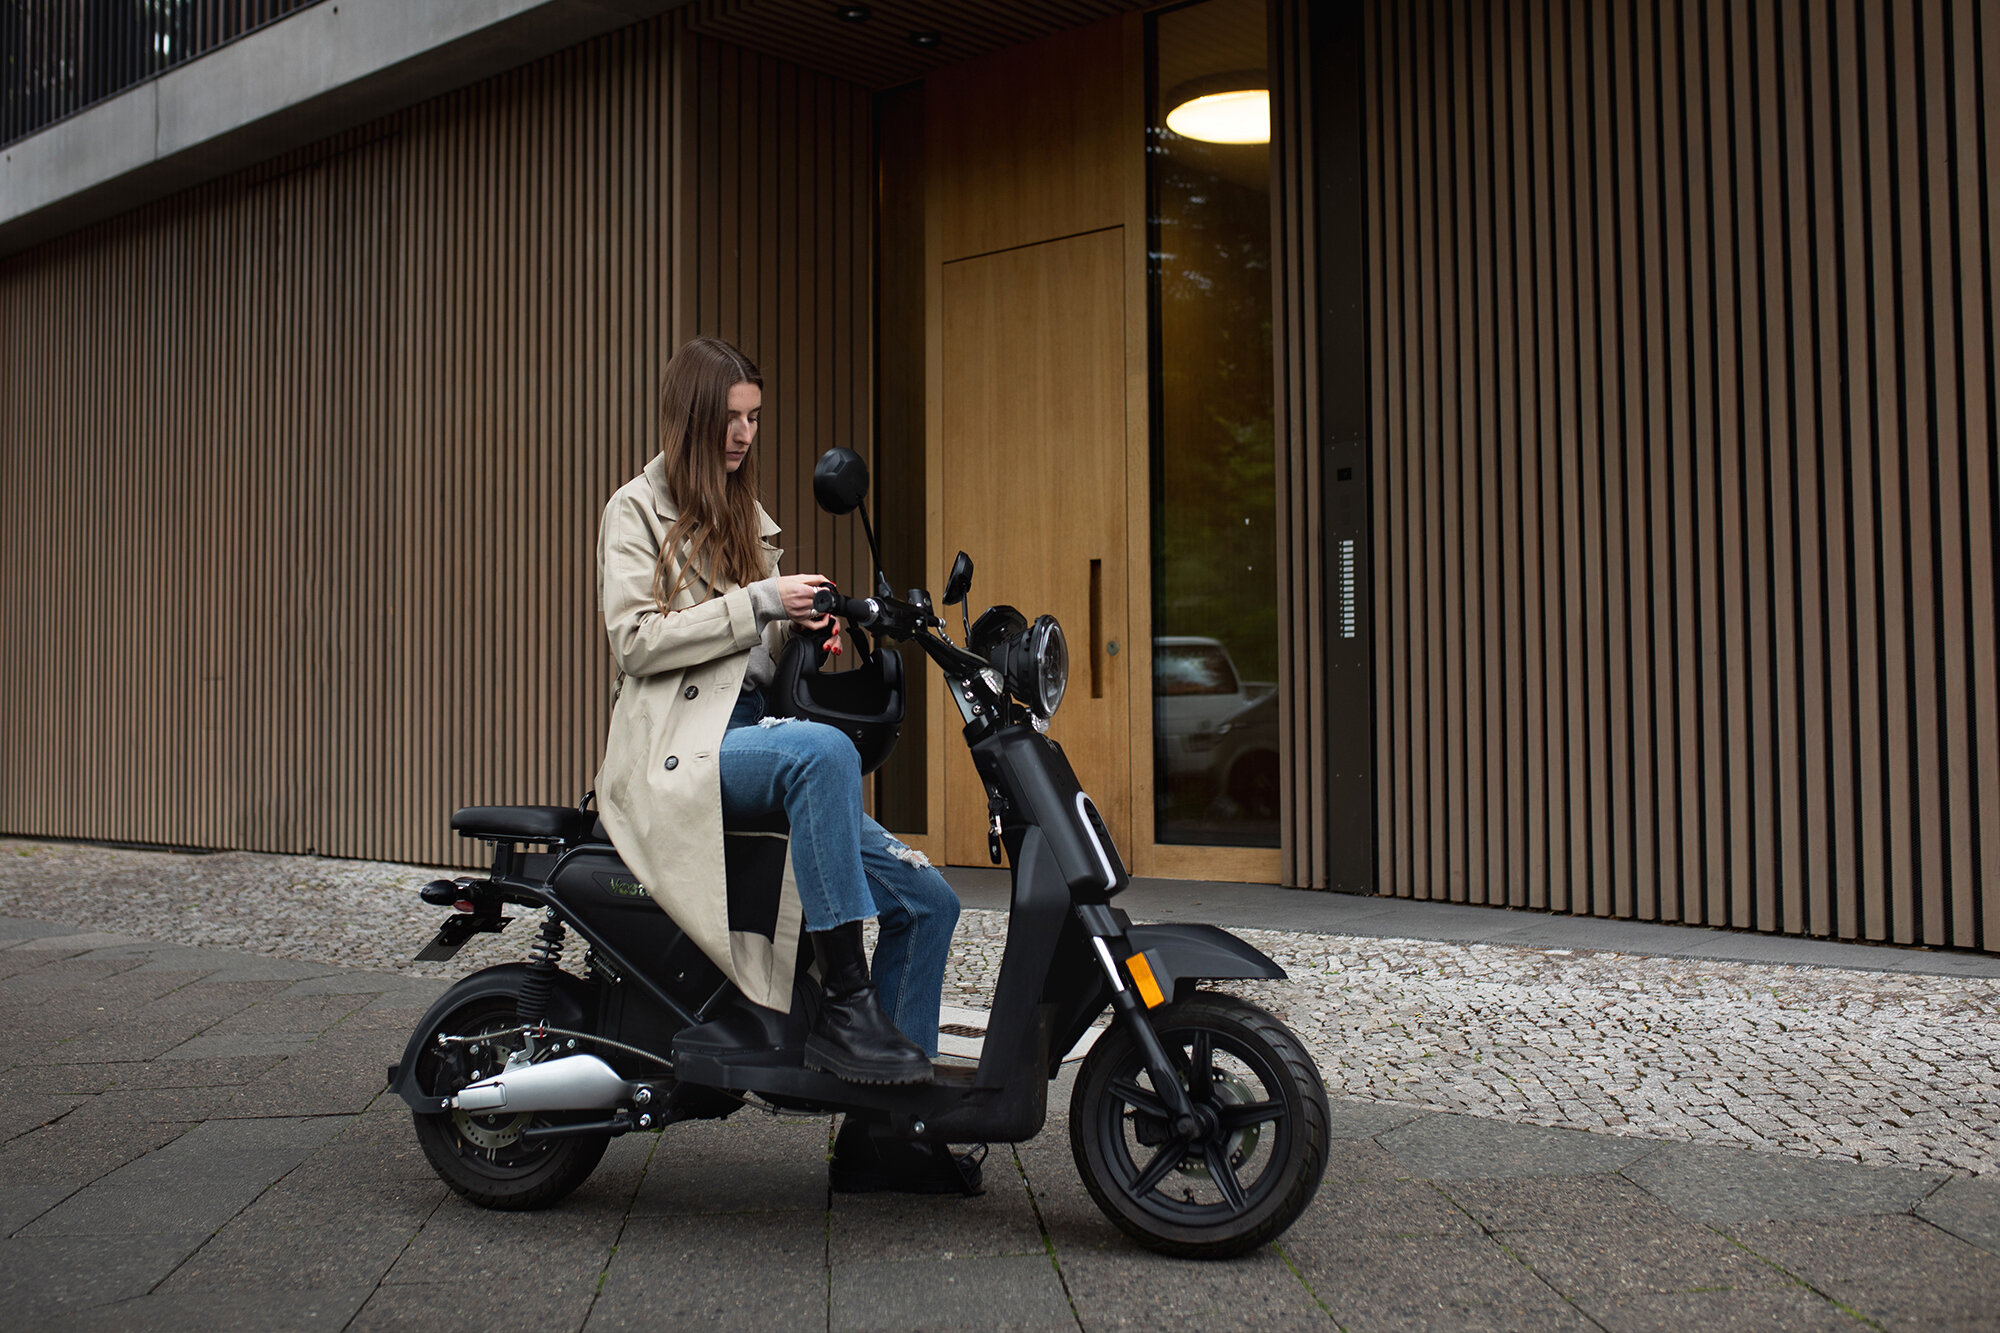 Britta Reineke, founder of ellectric tests the e-scooter from Vostok